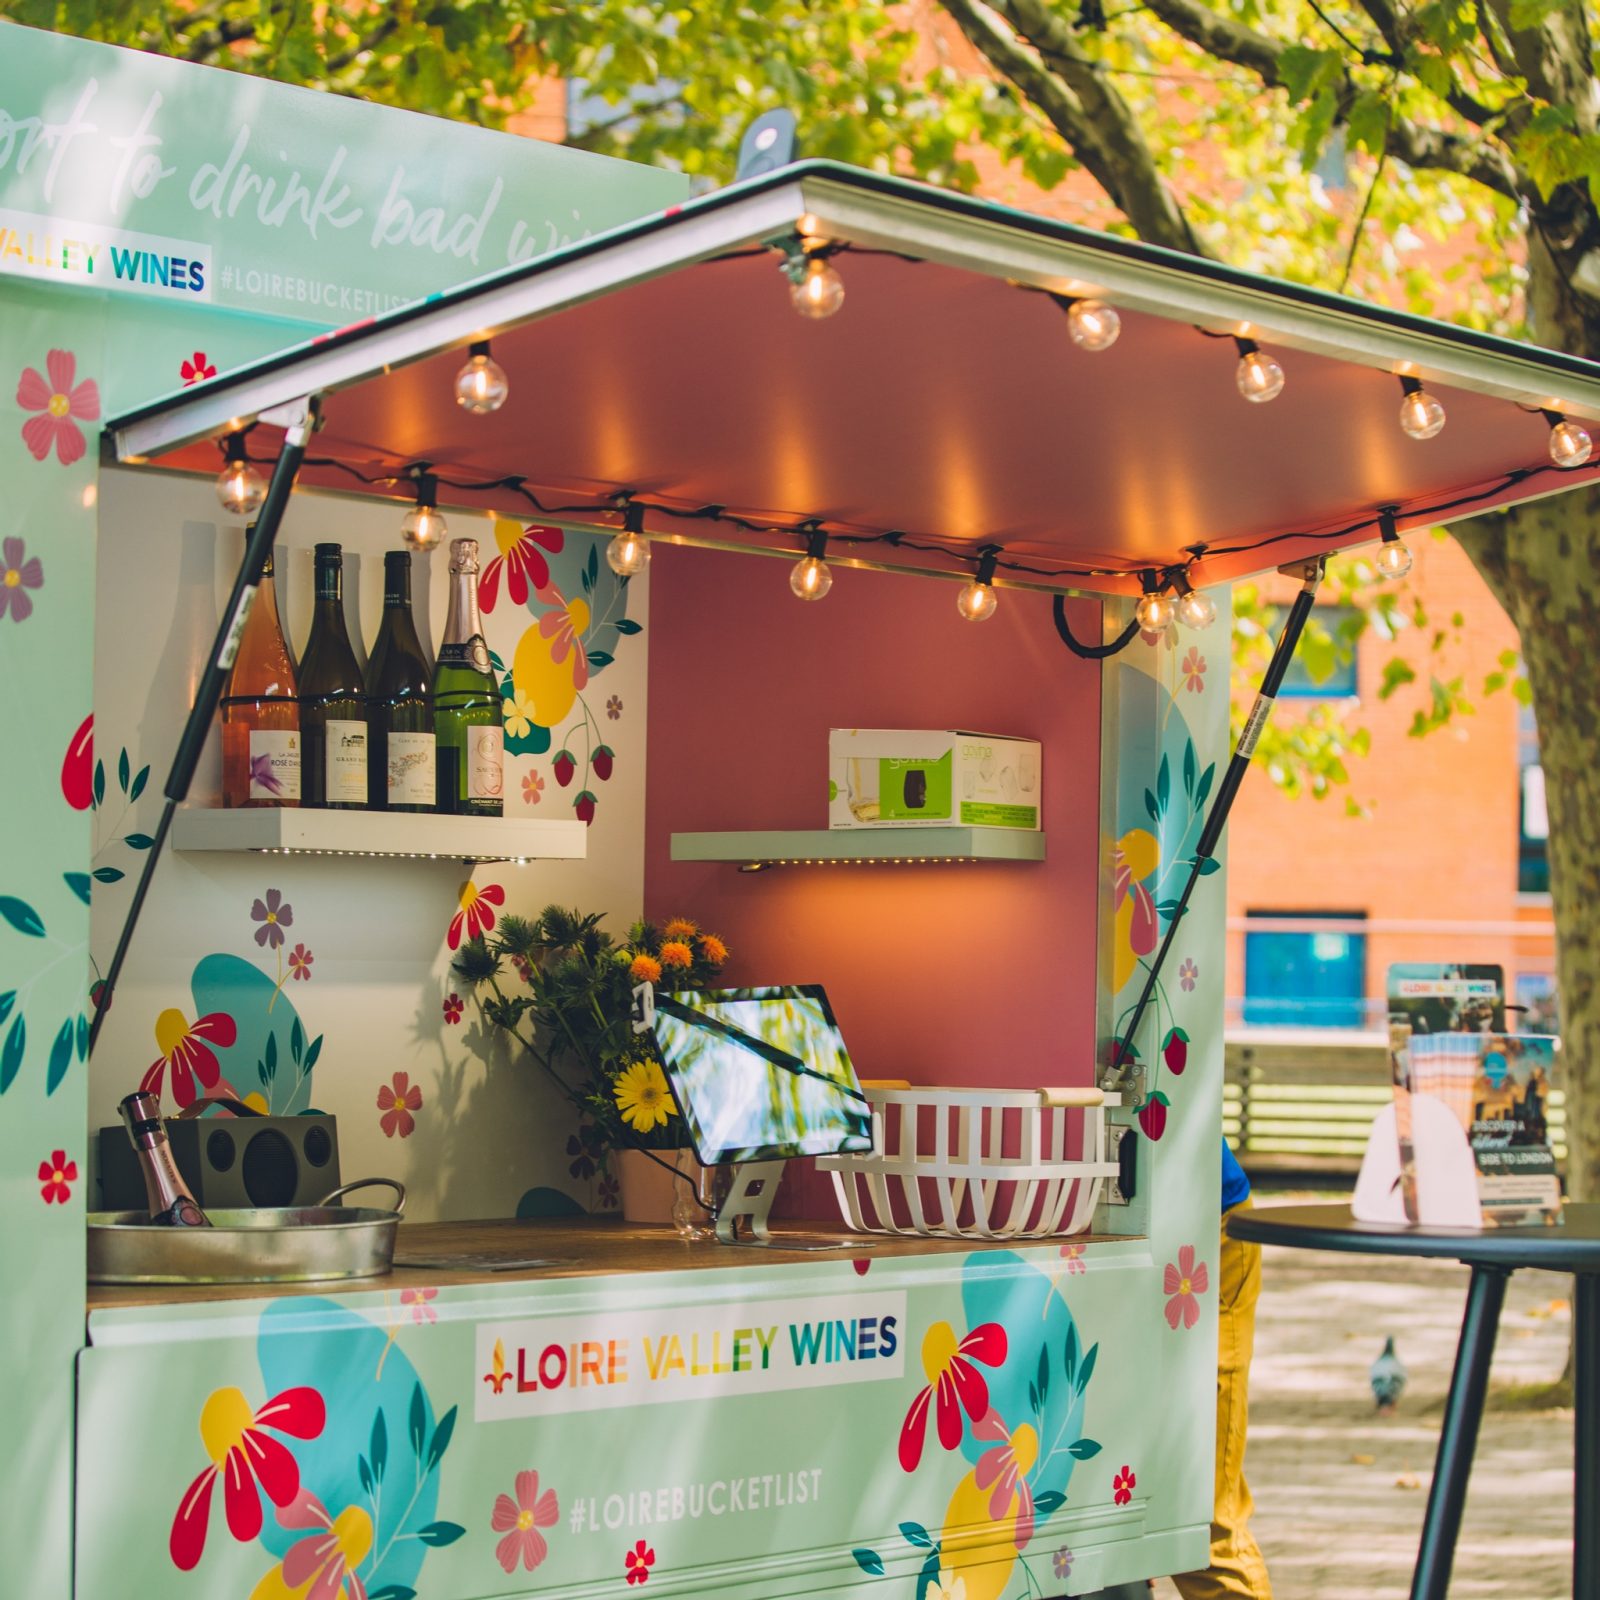 A little Loire Valley wine truck is popping up in Manchester next month, The Manc